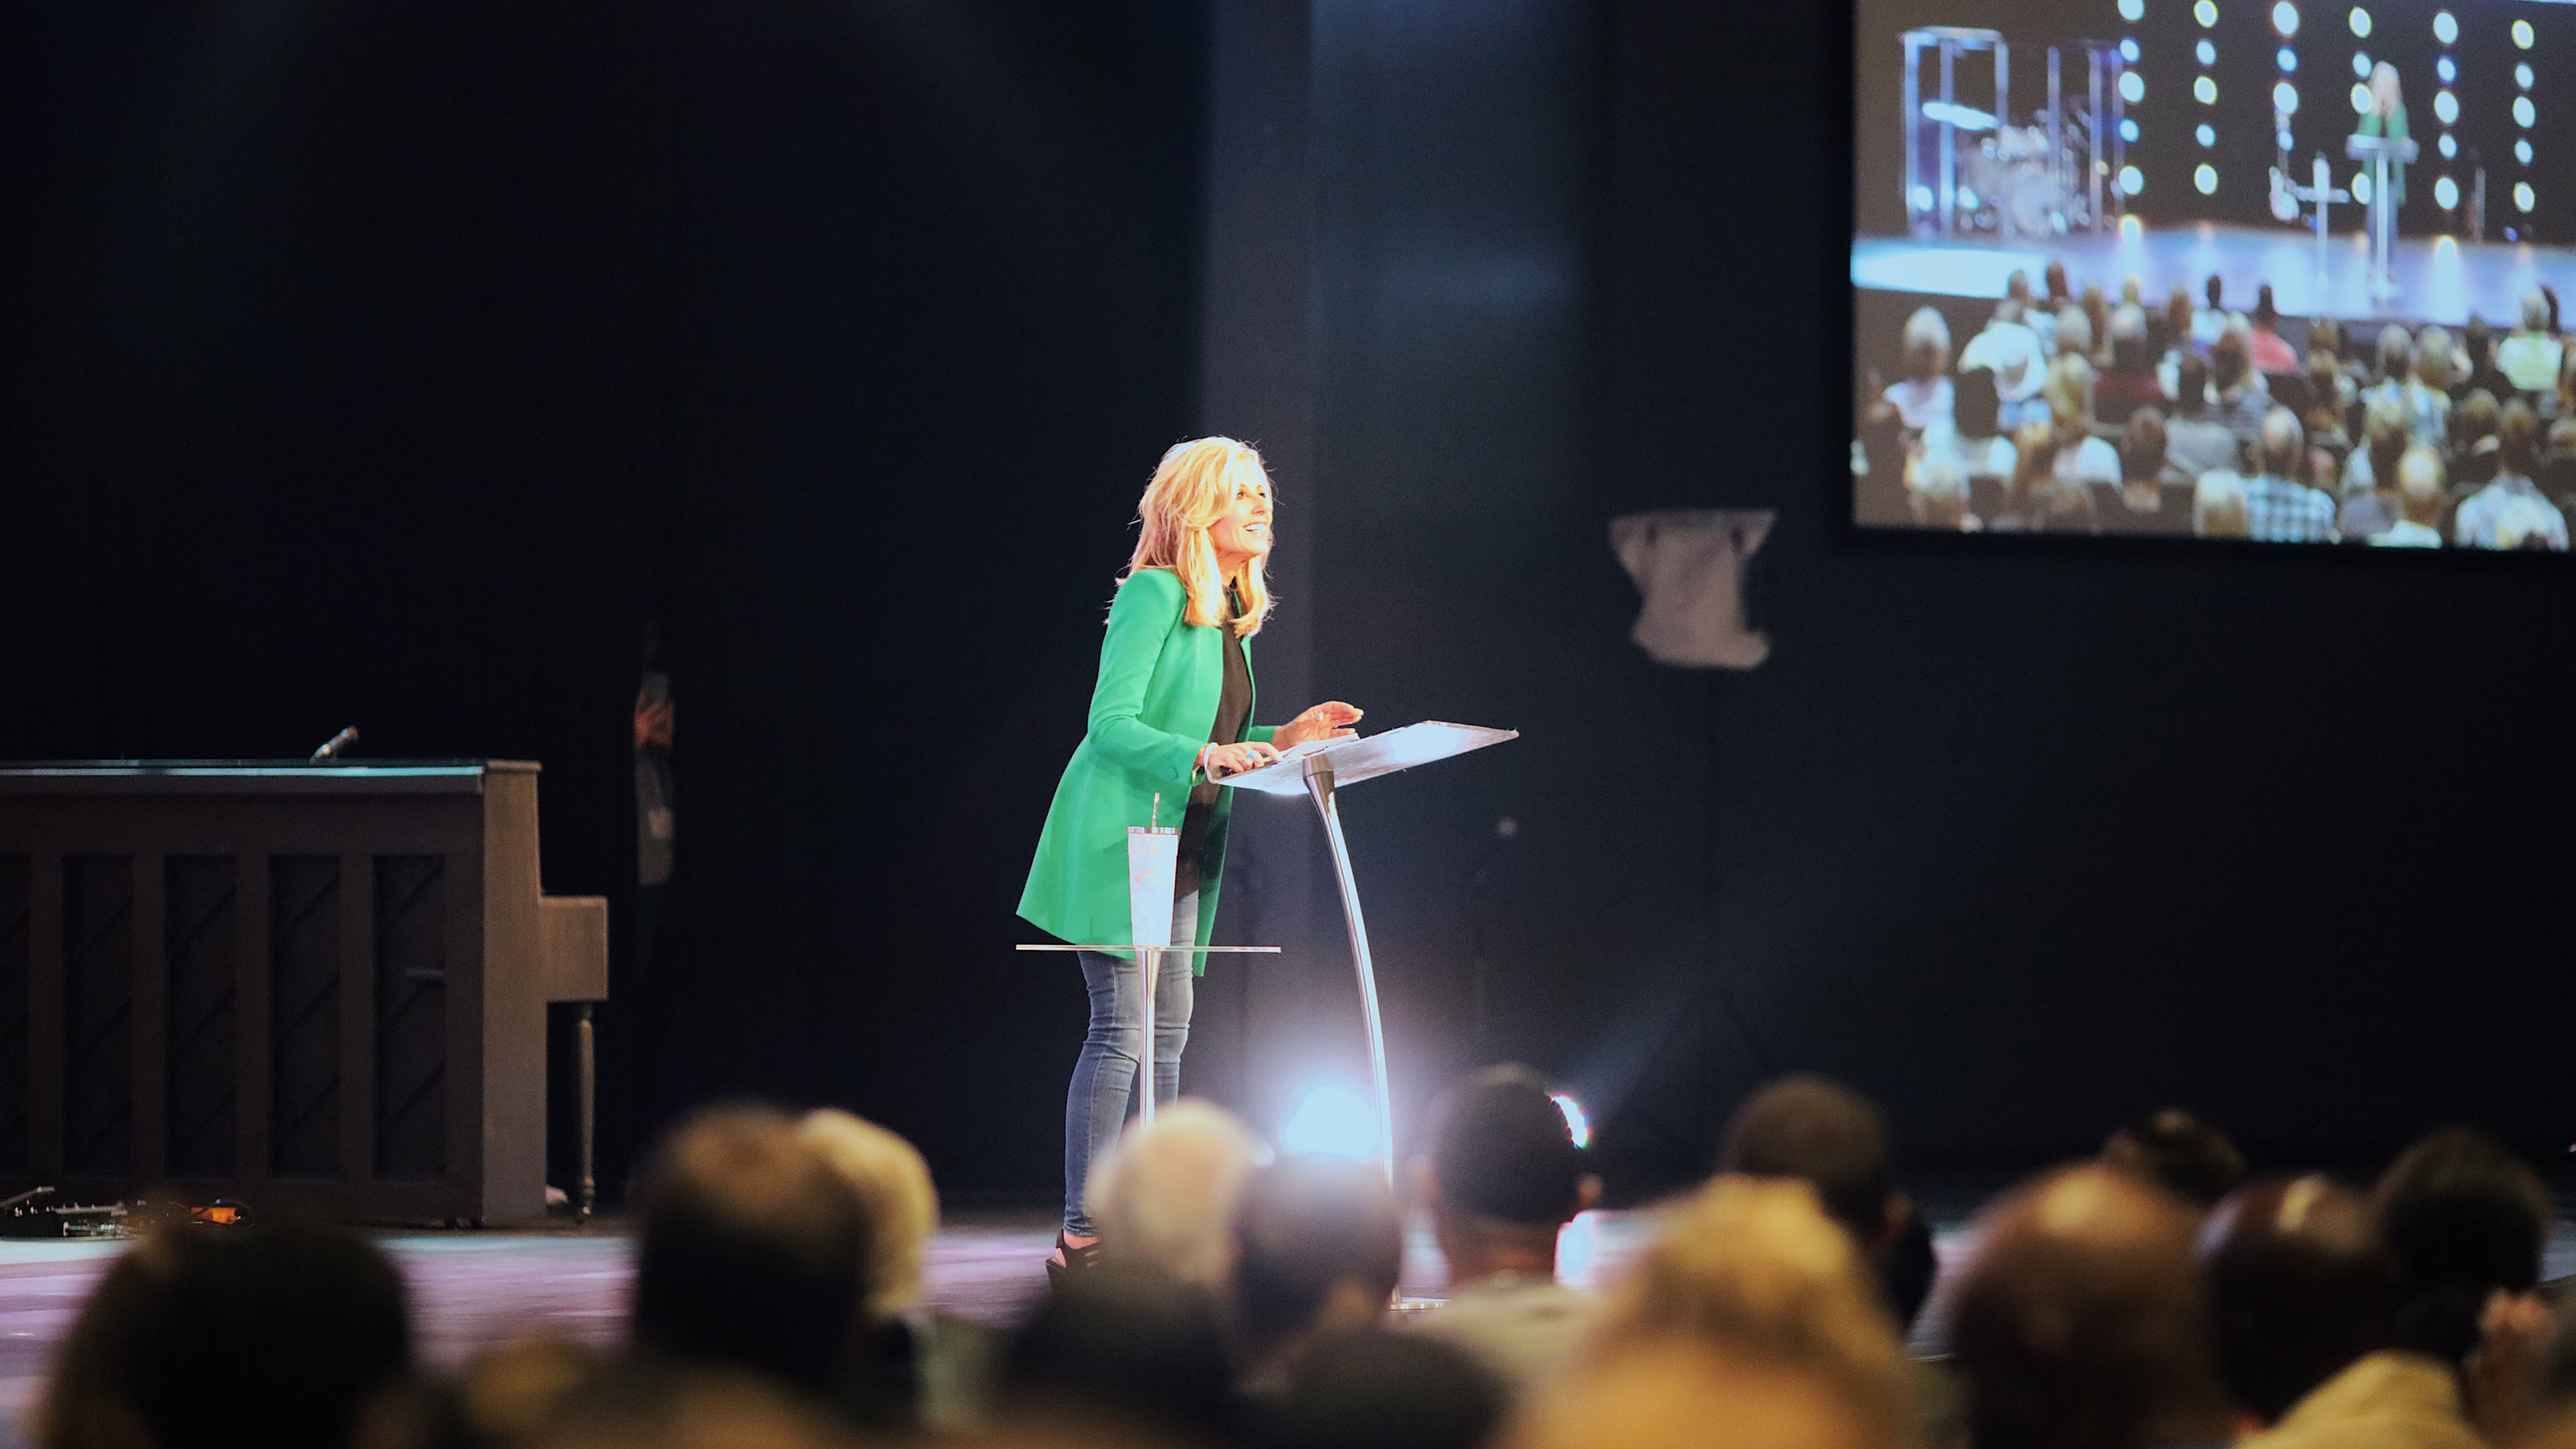 Beth Moore speaks at Transformation Church, a nondenominational multiethnic evangelical megachurch near Charlotte, N.C., on Sunday, June 2, 2019. Photo courtesy of Transformation Church